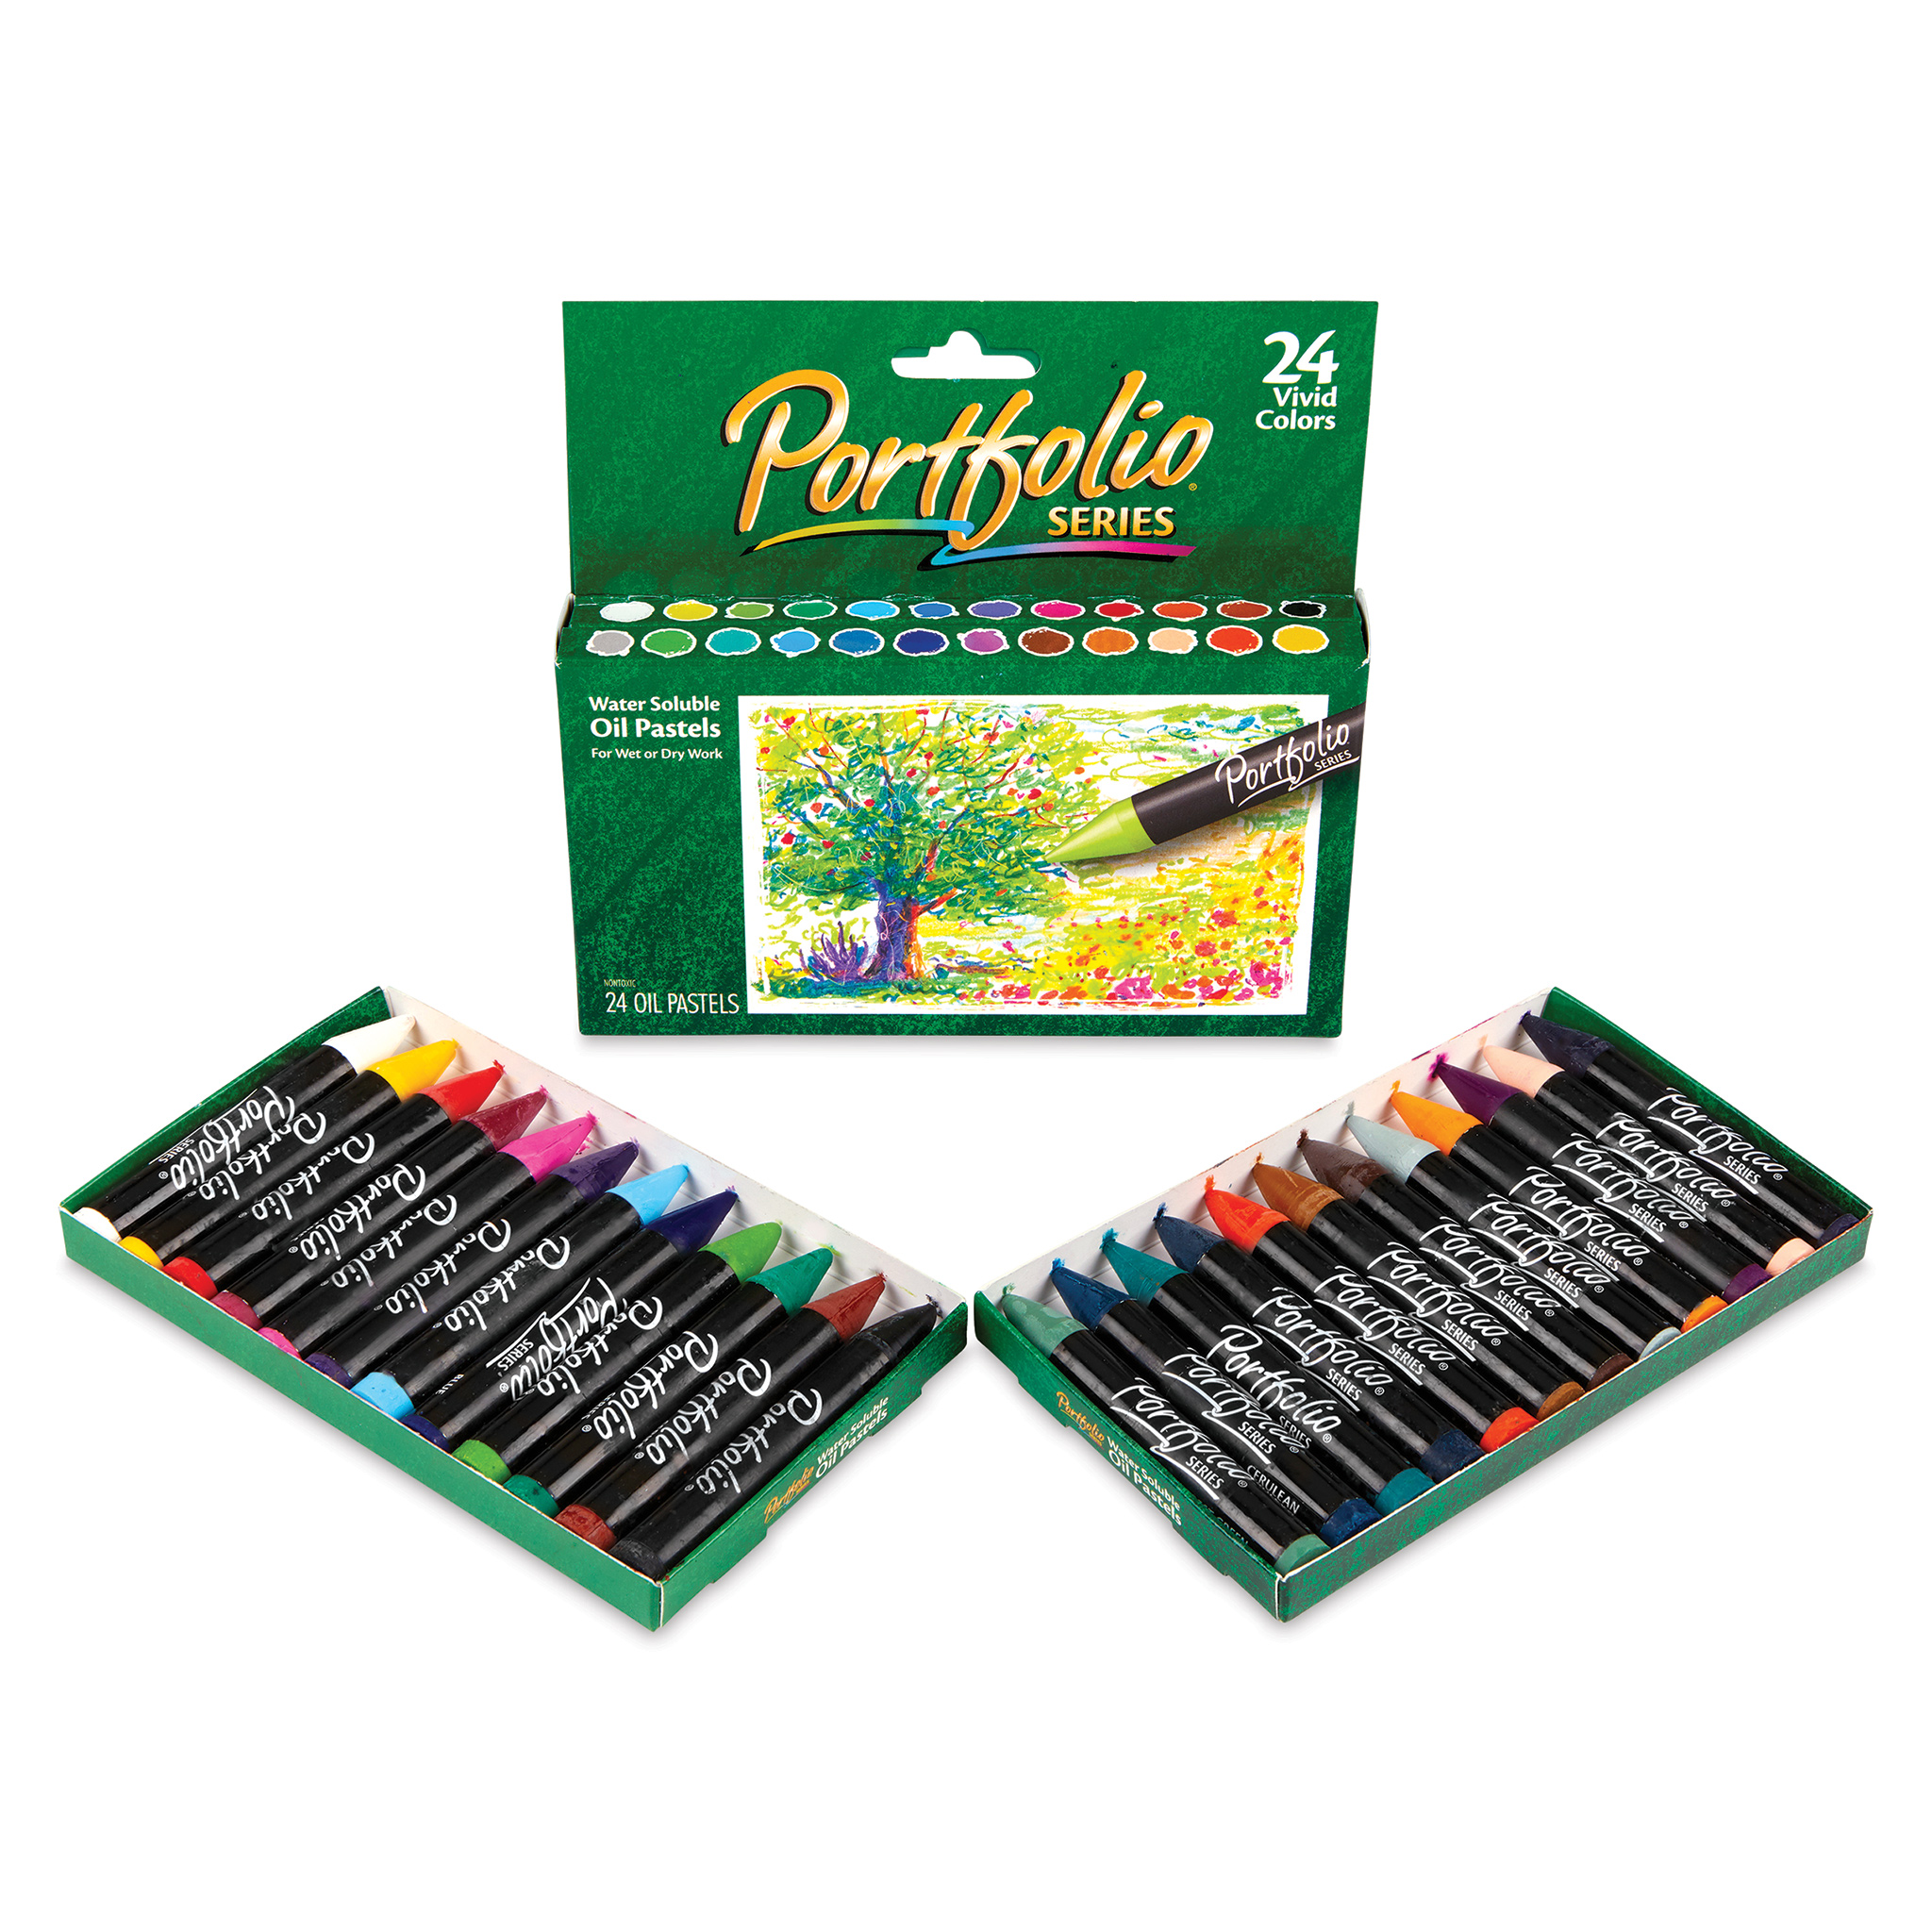 Crayola Water Soluble Oil Pastels